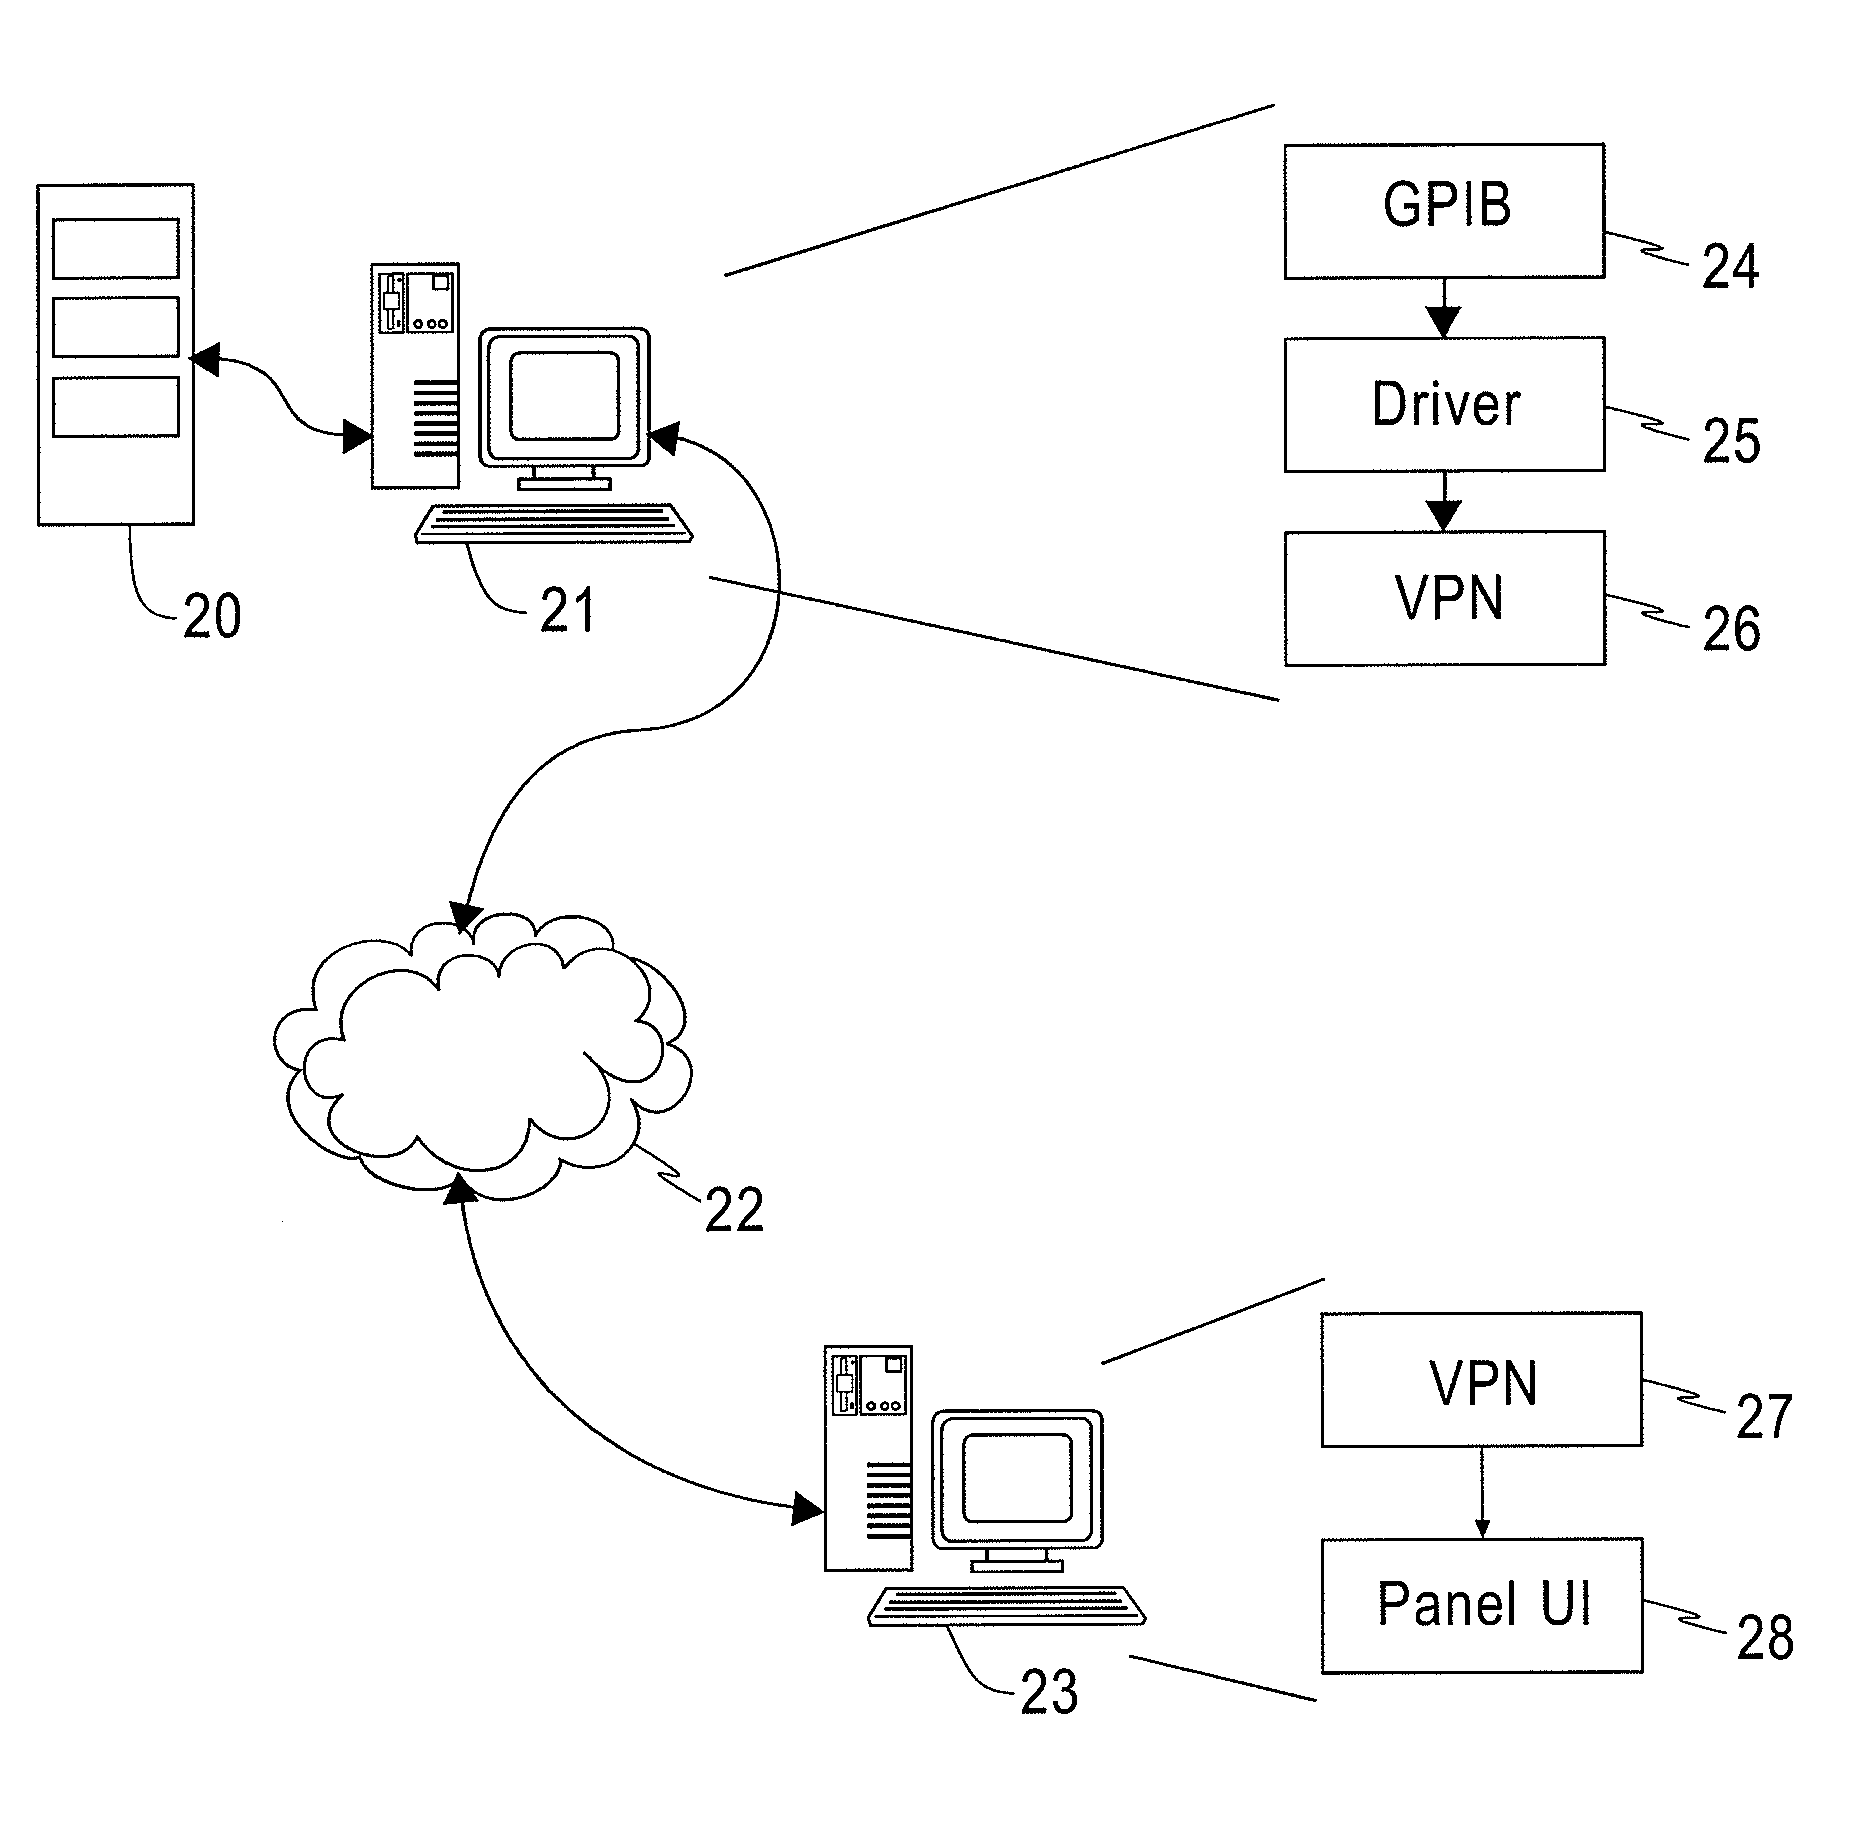 System and Method for Virtual Control of Laboratory Equipment